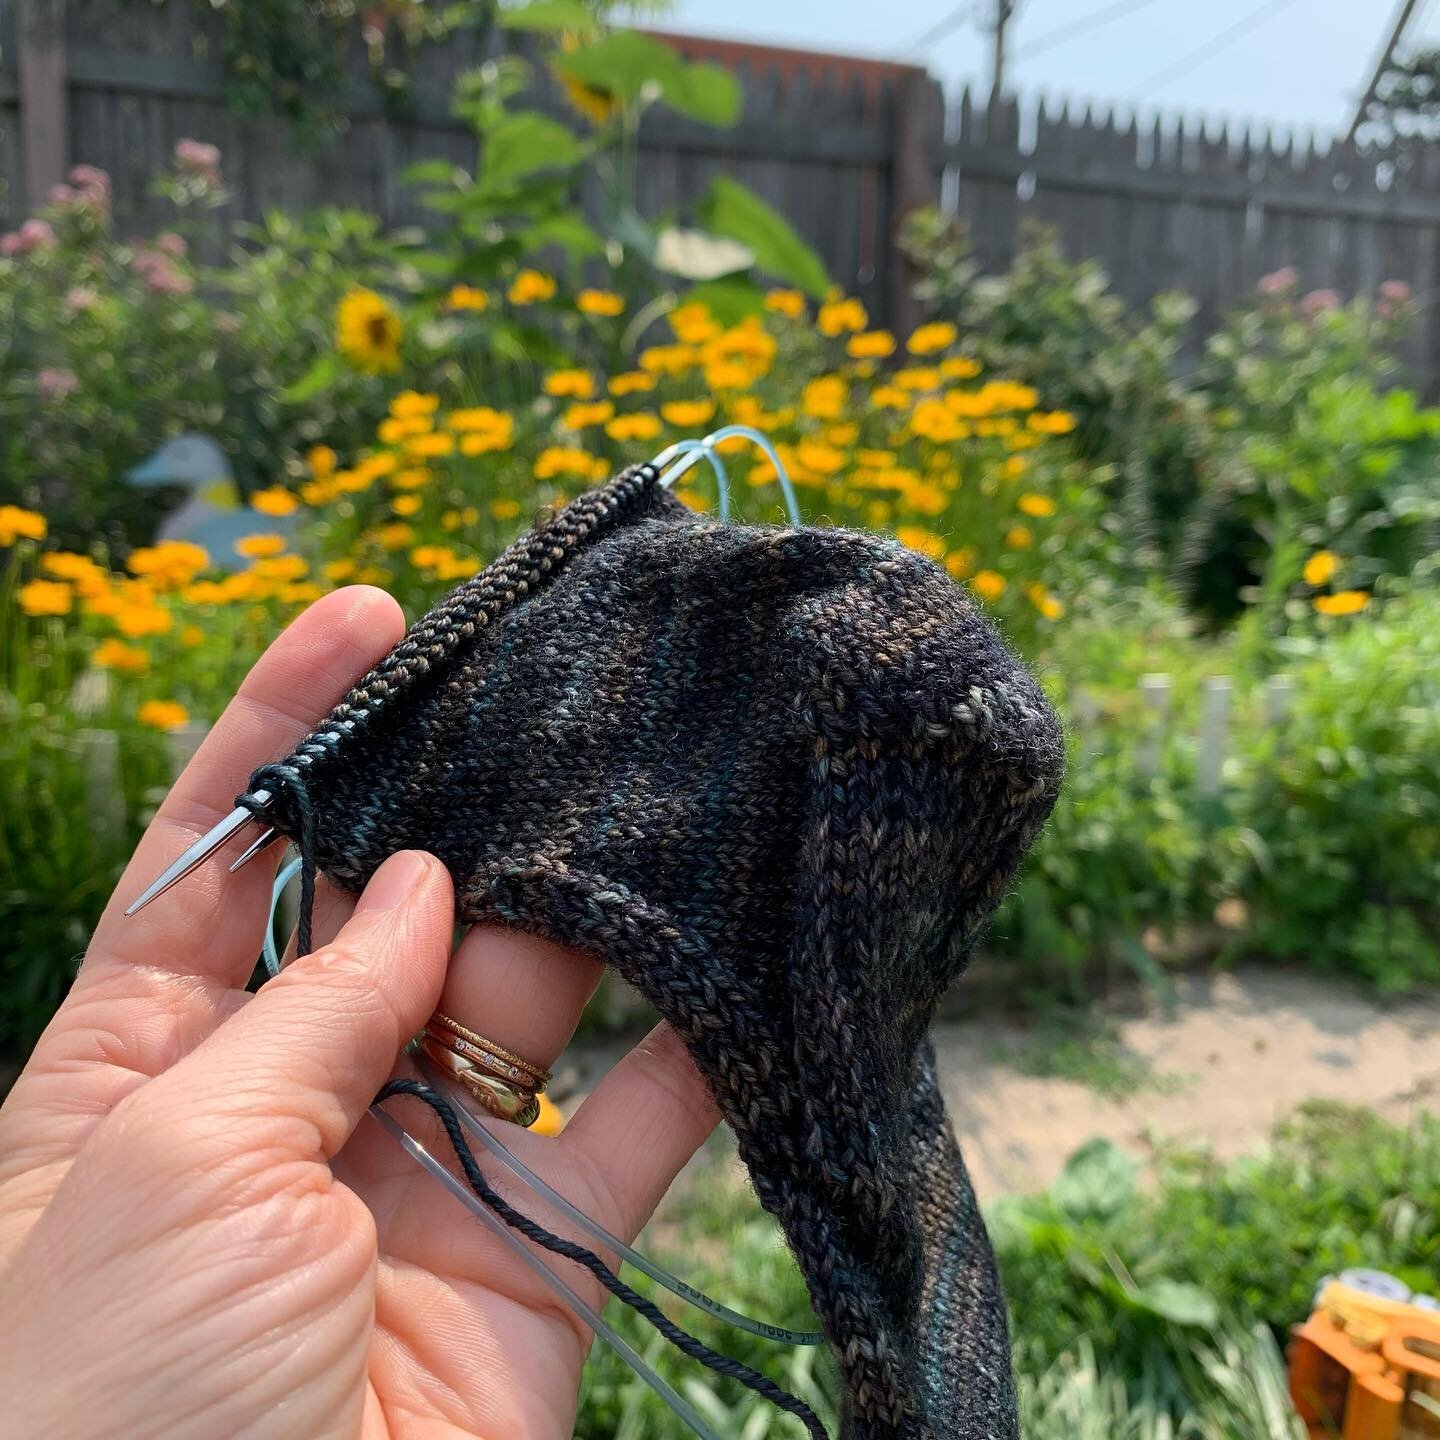 A heel turn and a quiet moment in the garden. 😌🌻 Yes, I&rsquo;m still knitting socks! Just at a much slower pace. 💛
.
.
.
.
#sockknitting #ewetopia #heelturn #knitting #backyardgarden #summer